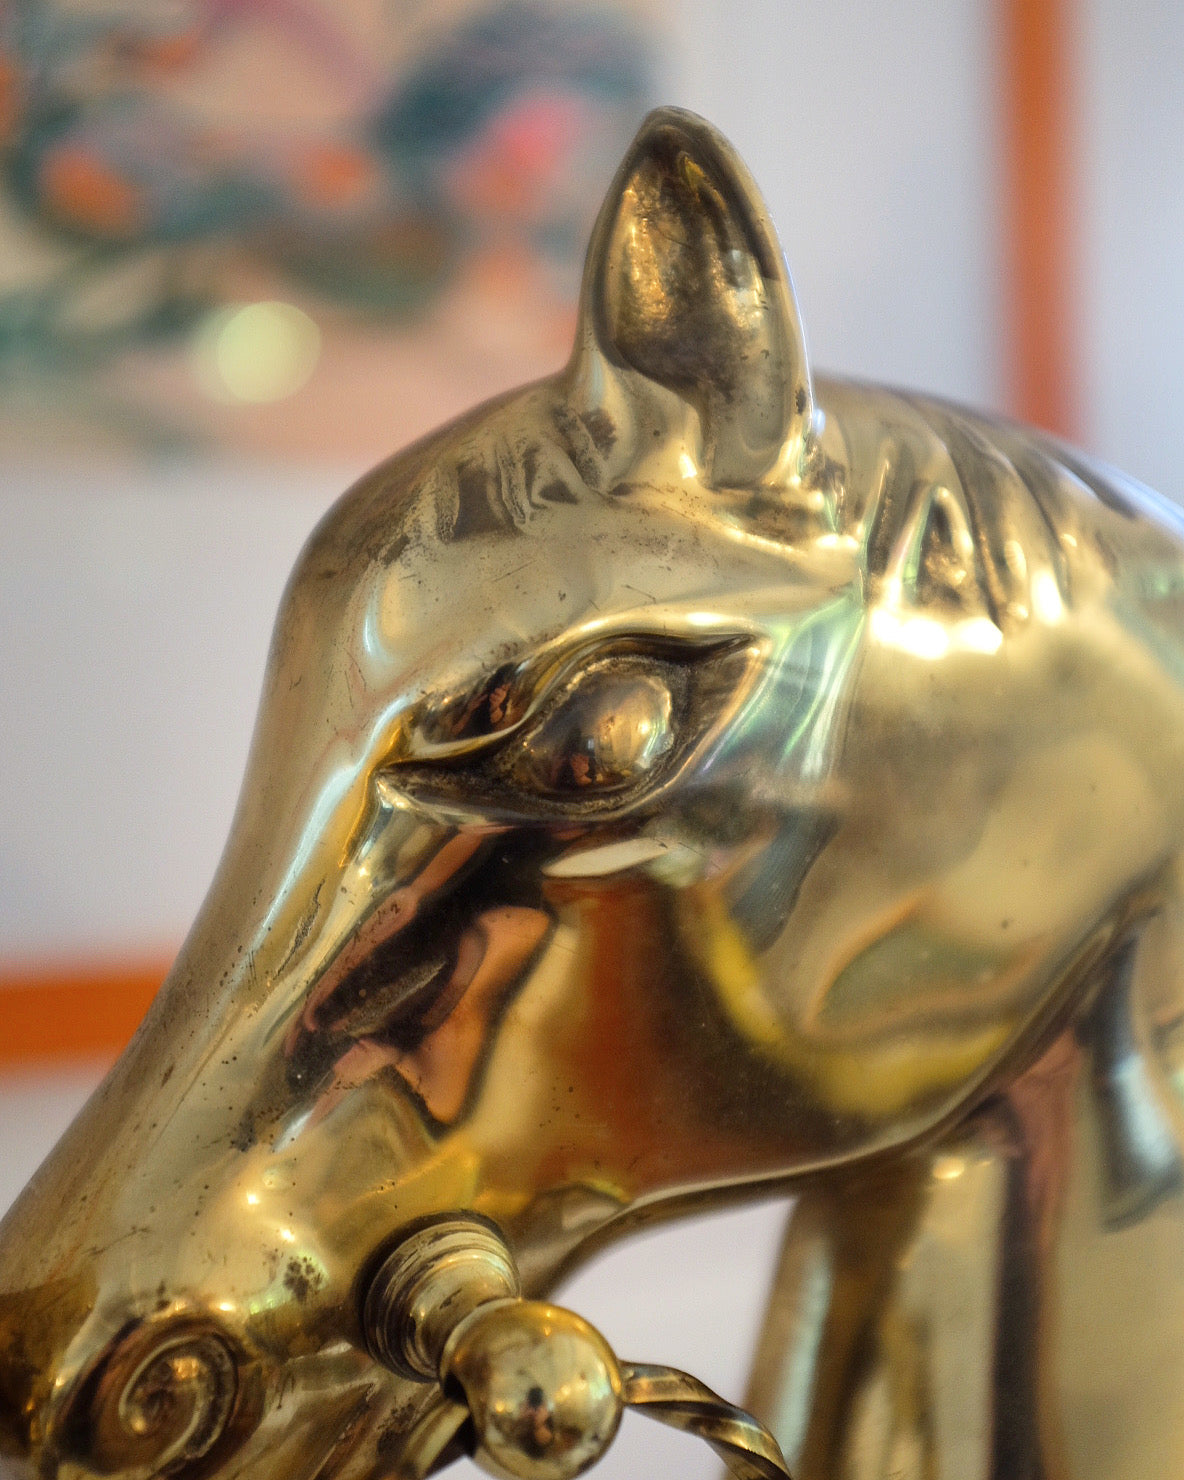 Solid Brass Horse Head Andirons